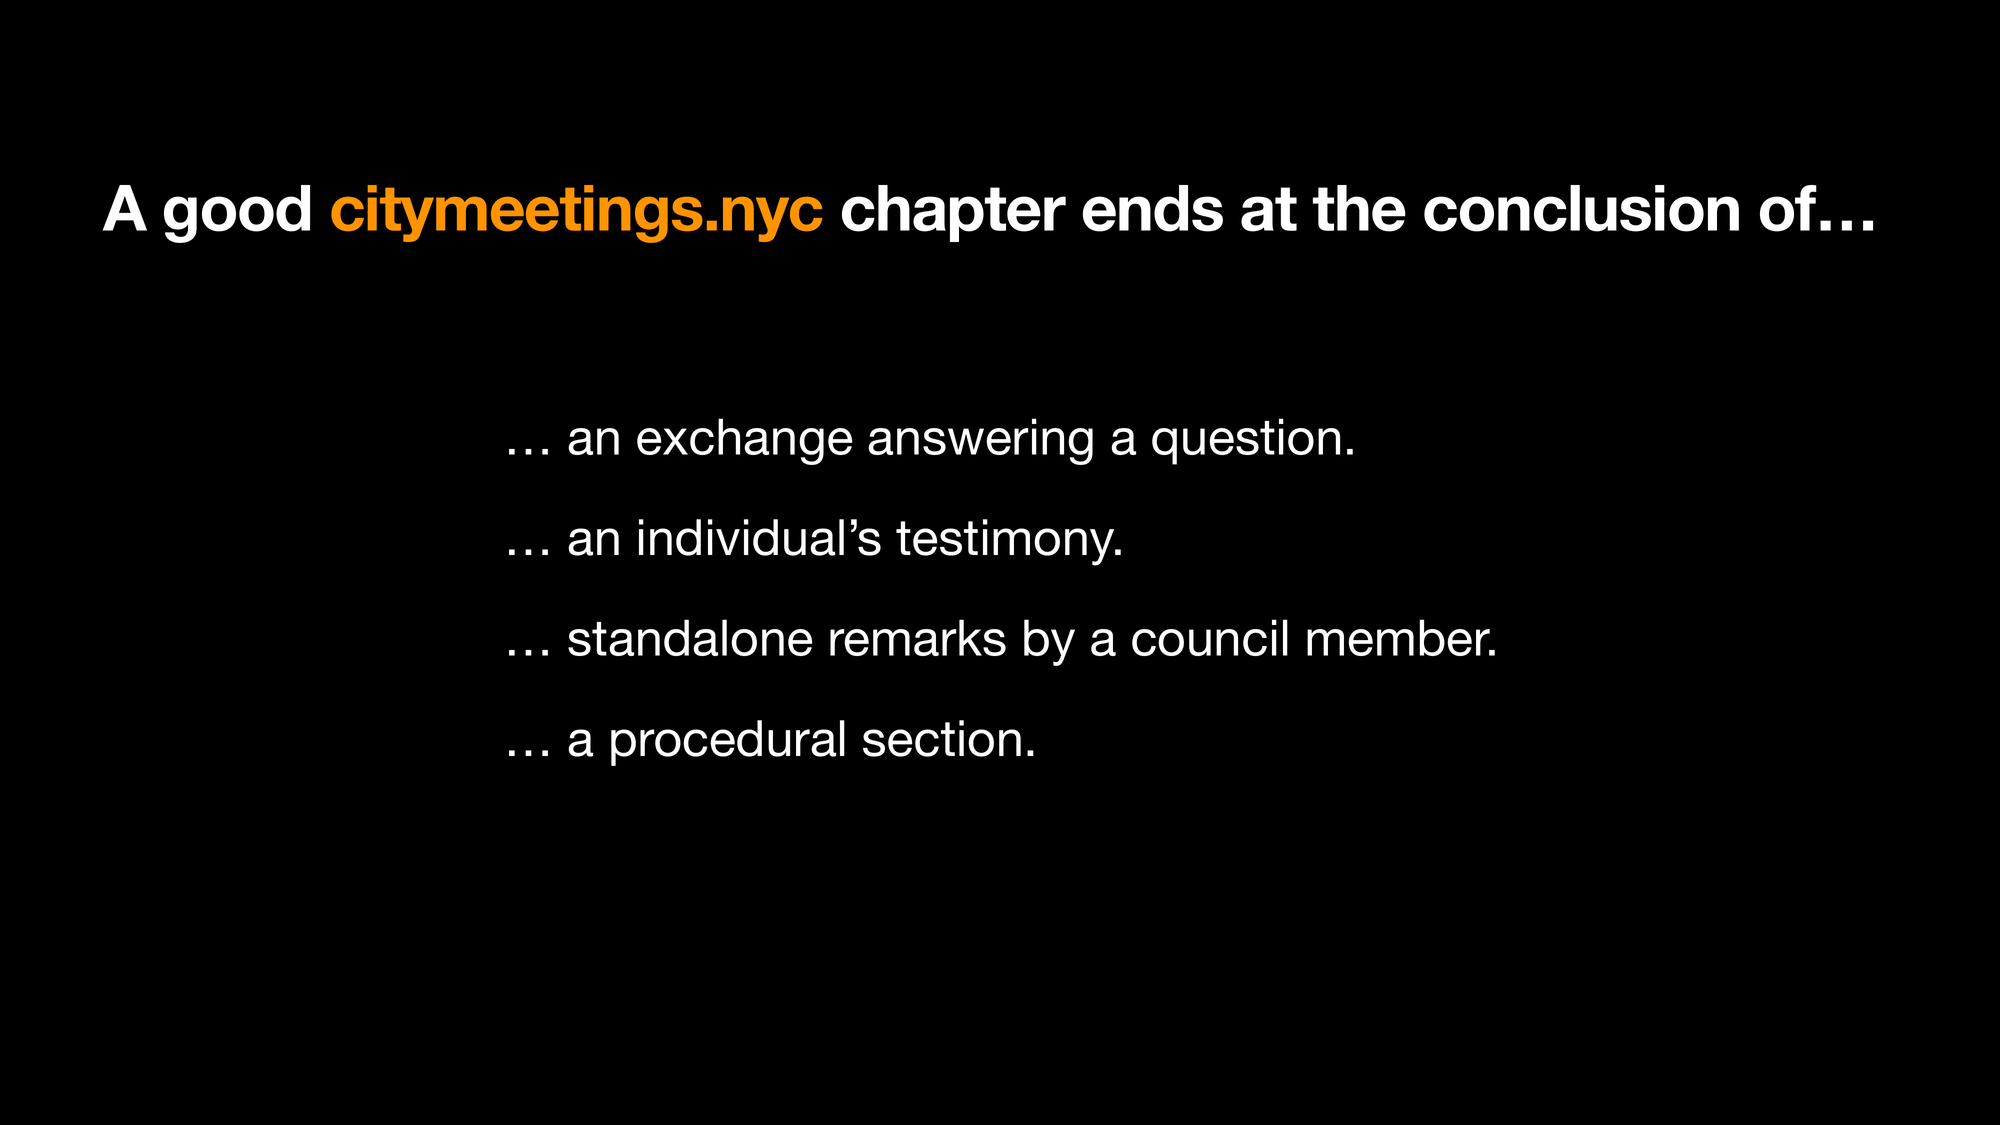 A good citymeetings.nyc chapter ends at the conclusion of&hellip;
&hellip; an exchange answering a question.
&hellip; an individual’s testimony.
&hellip; Sstandalone remarks by a council member.
&hellip; a procedural section.
